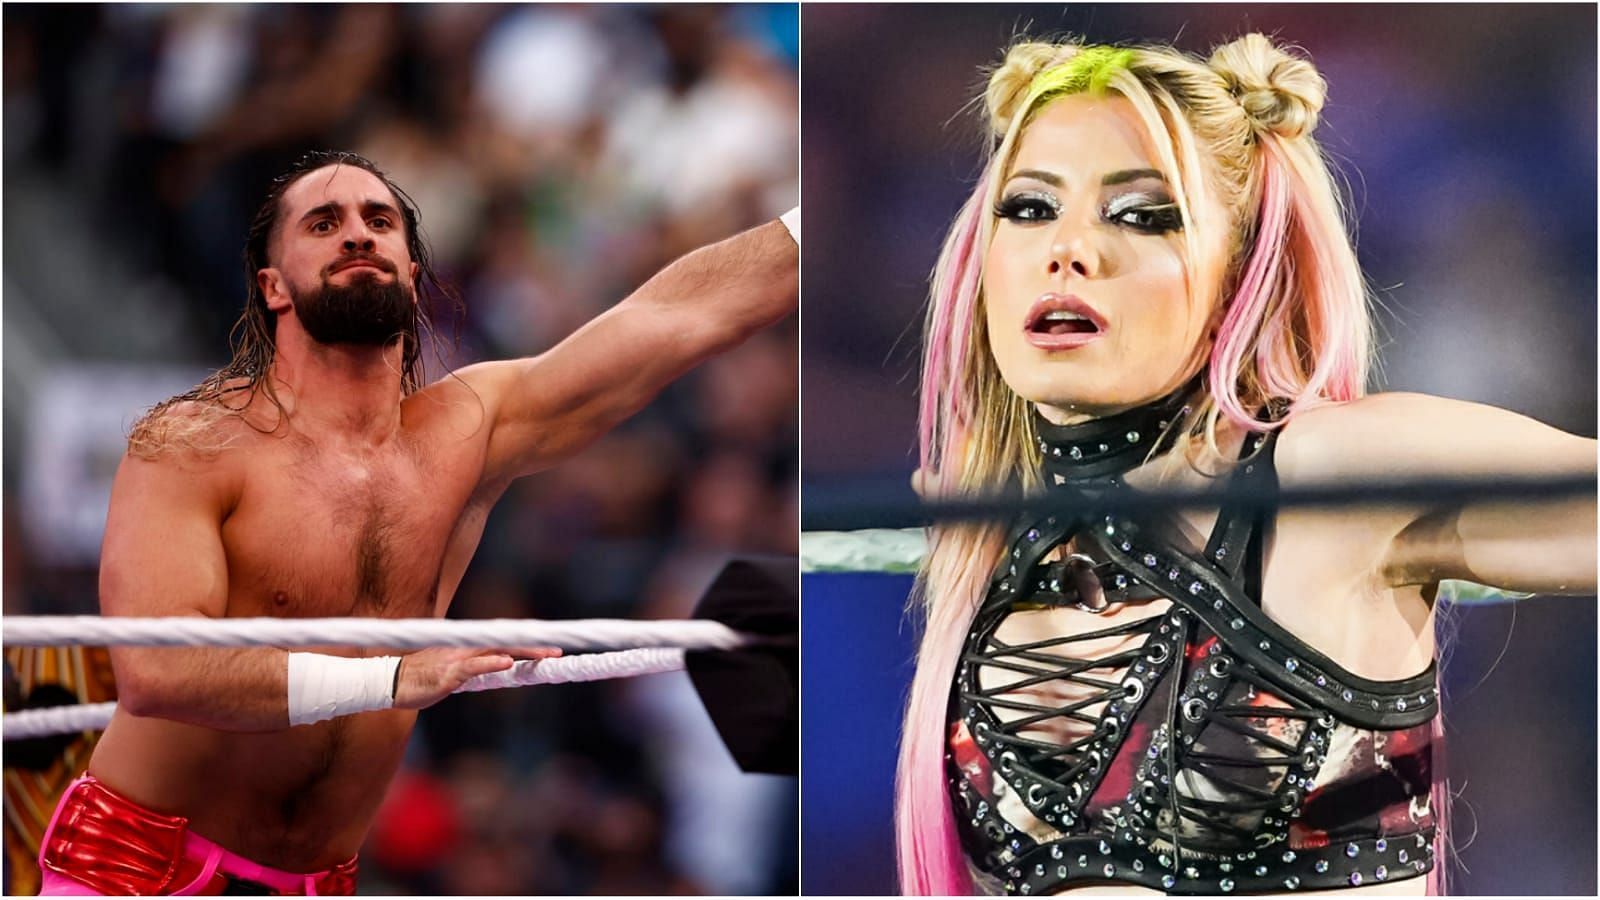 Seth Rollins (left) and Alexa Bliss (right)